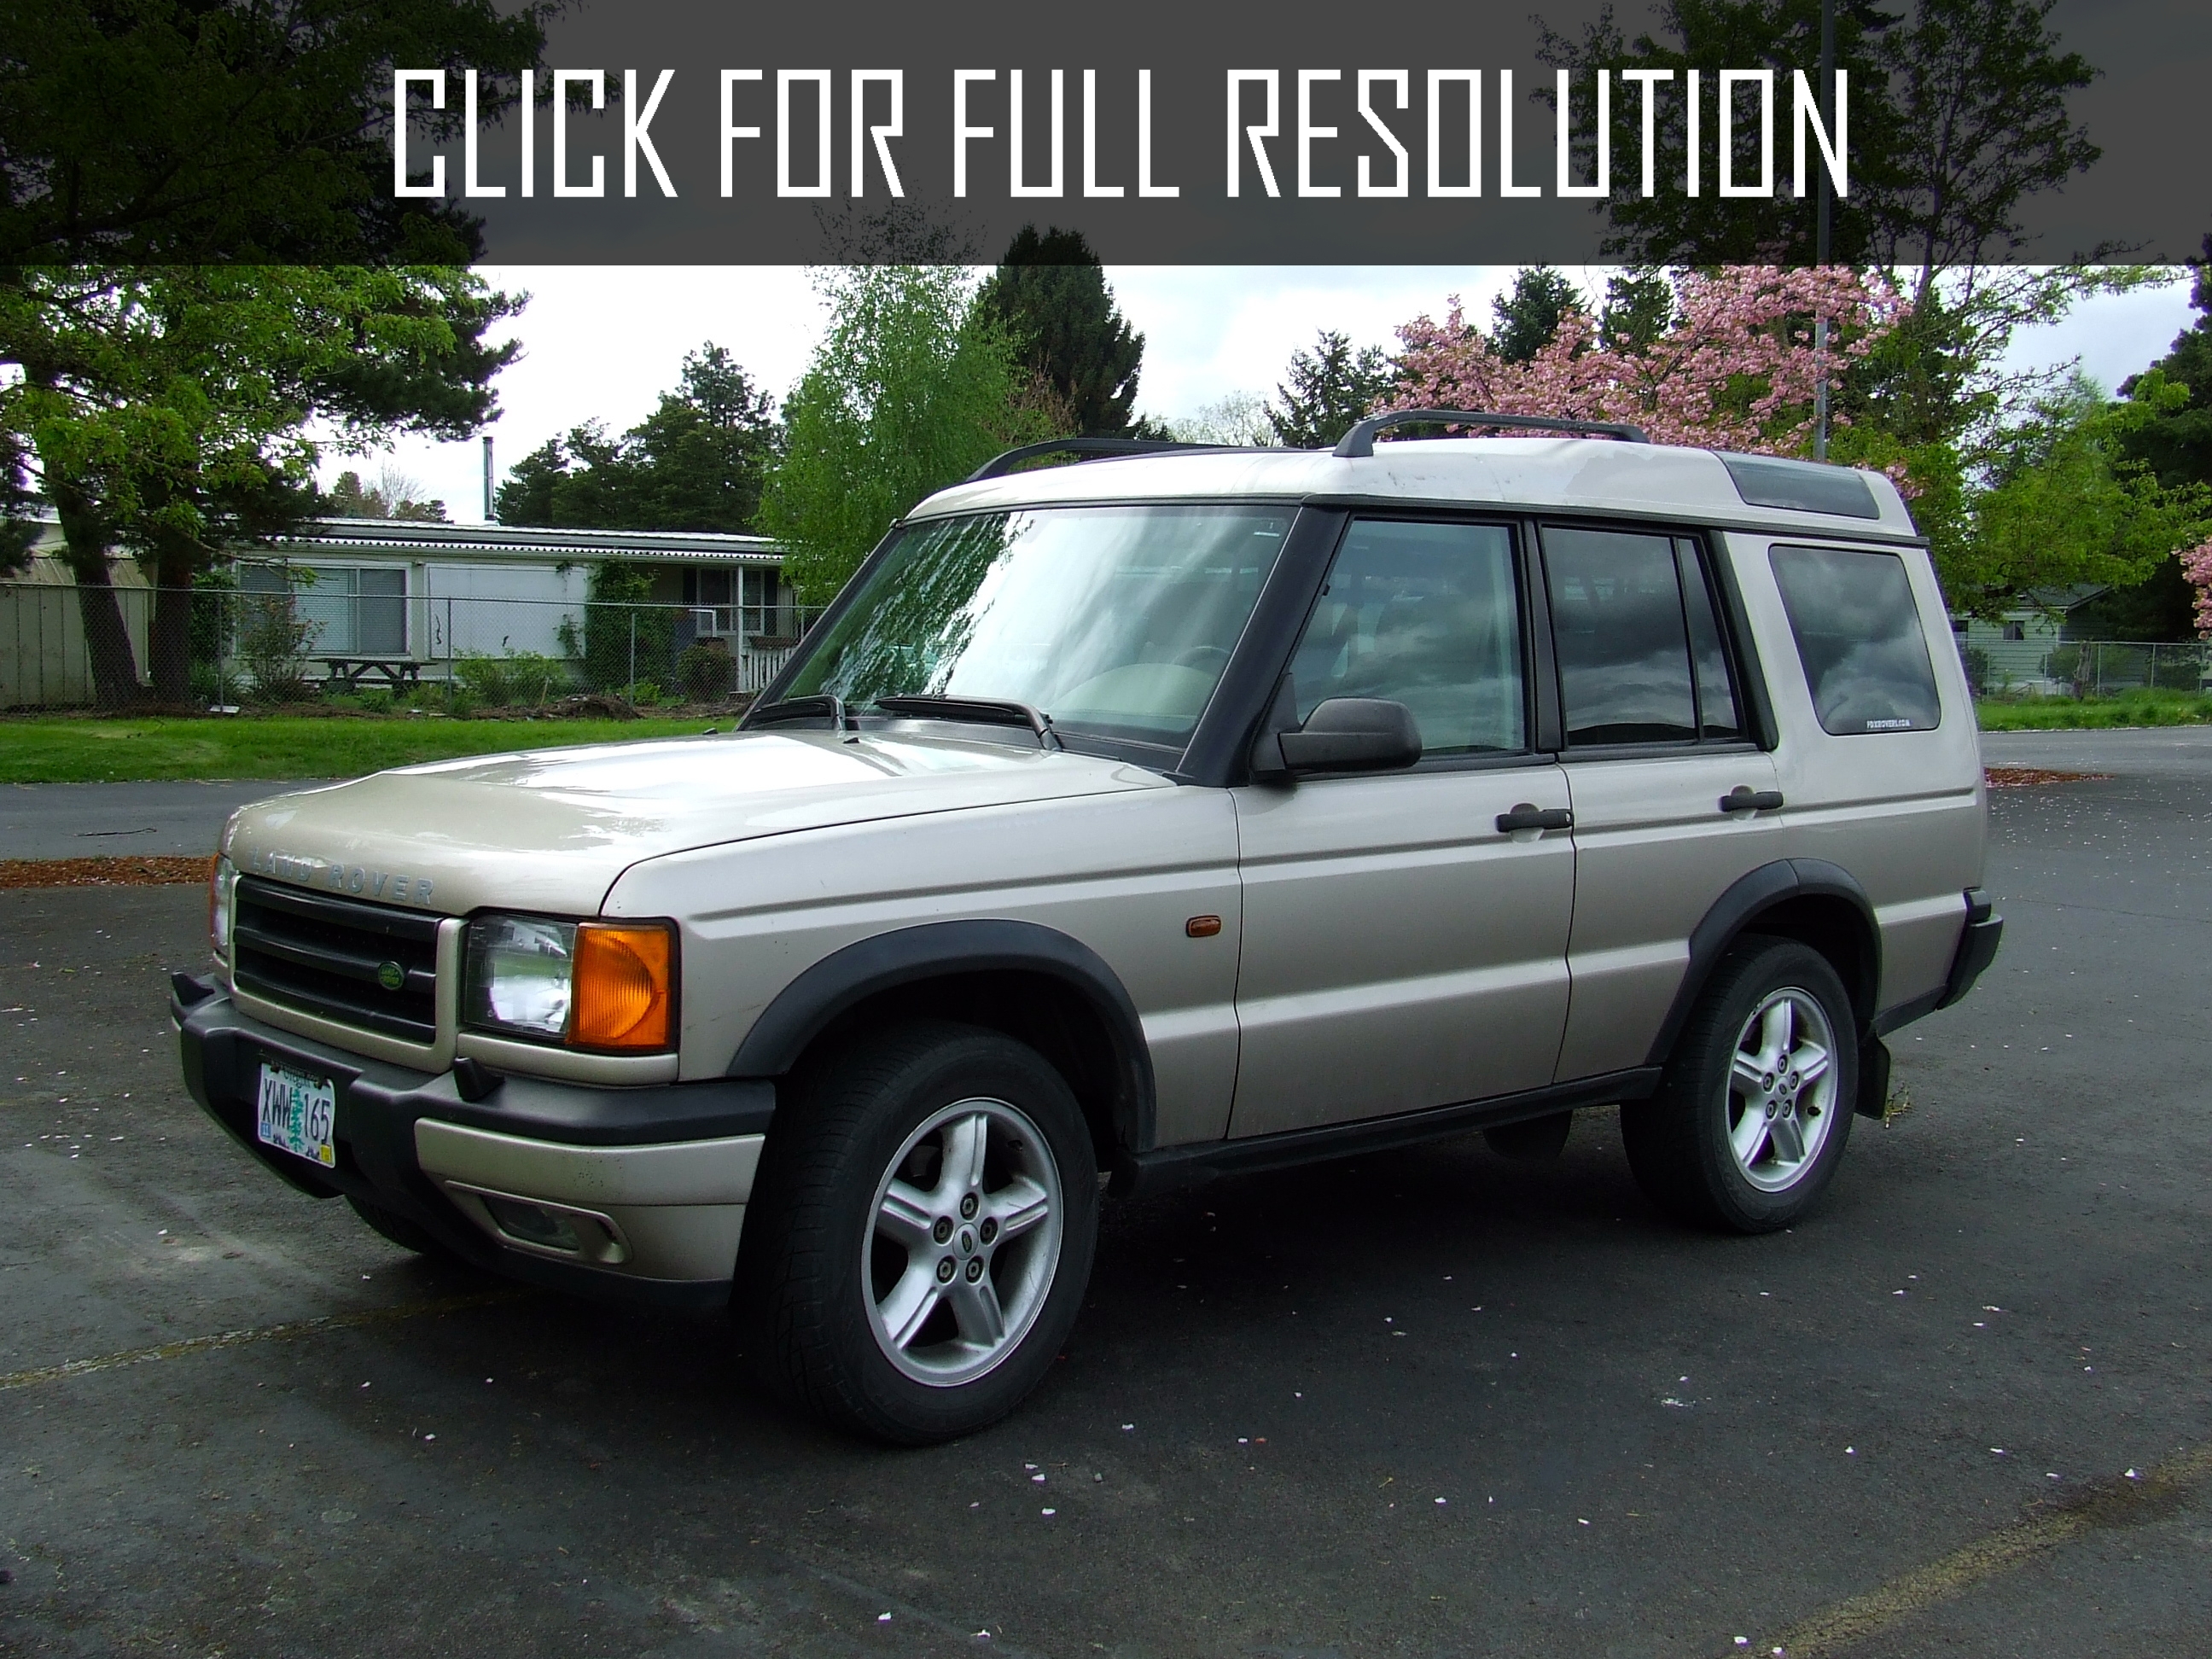 2001 Land Rover Discovery 2